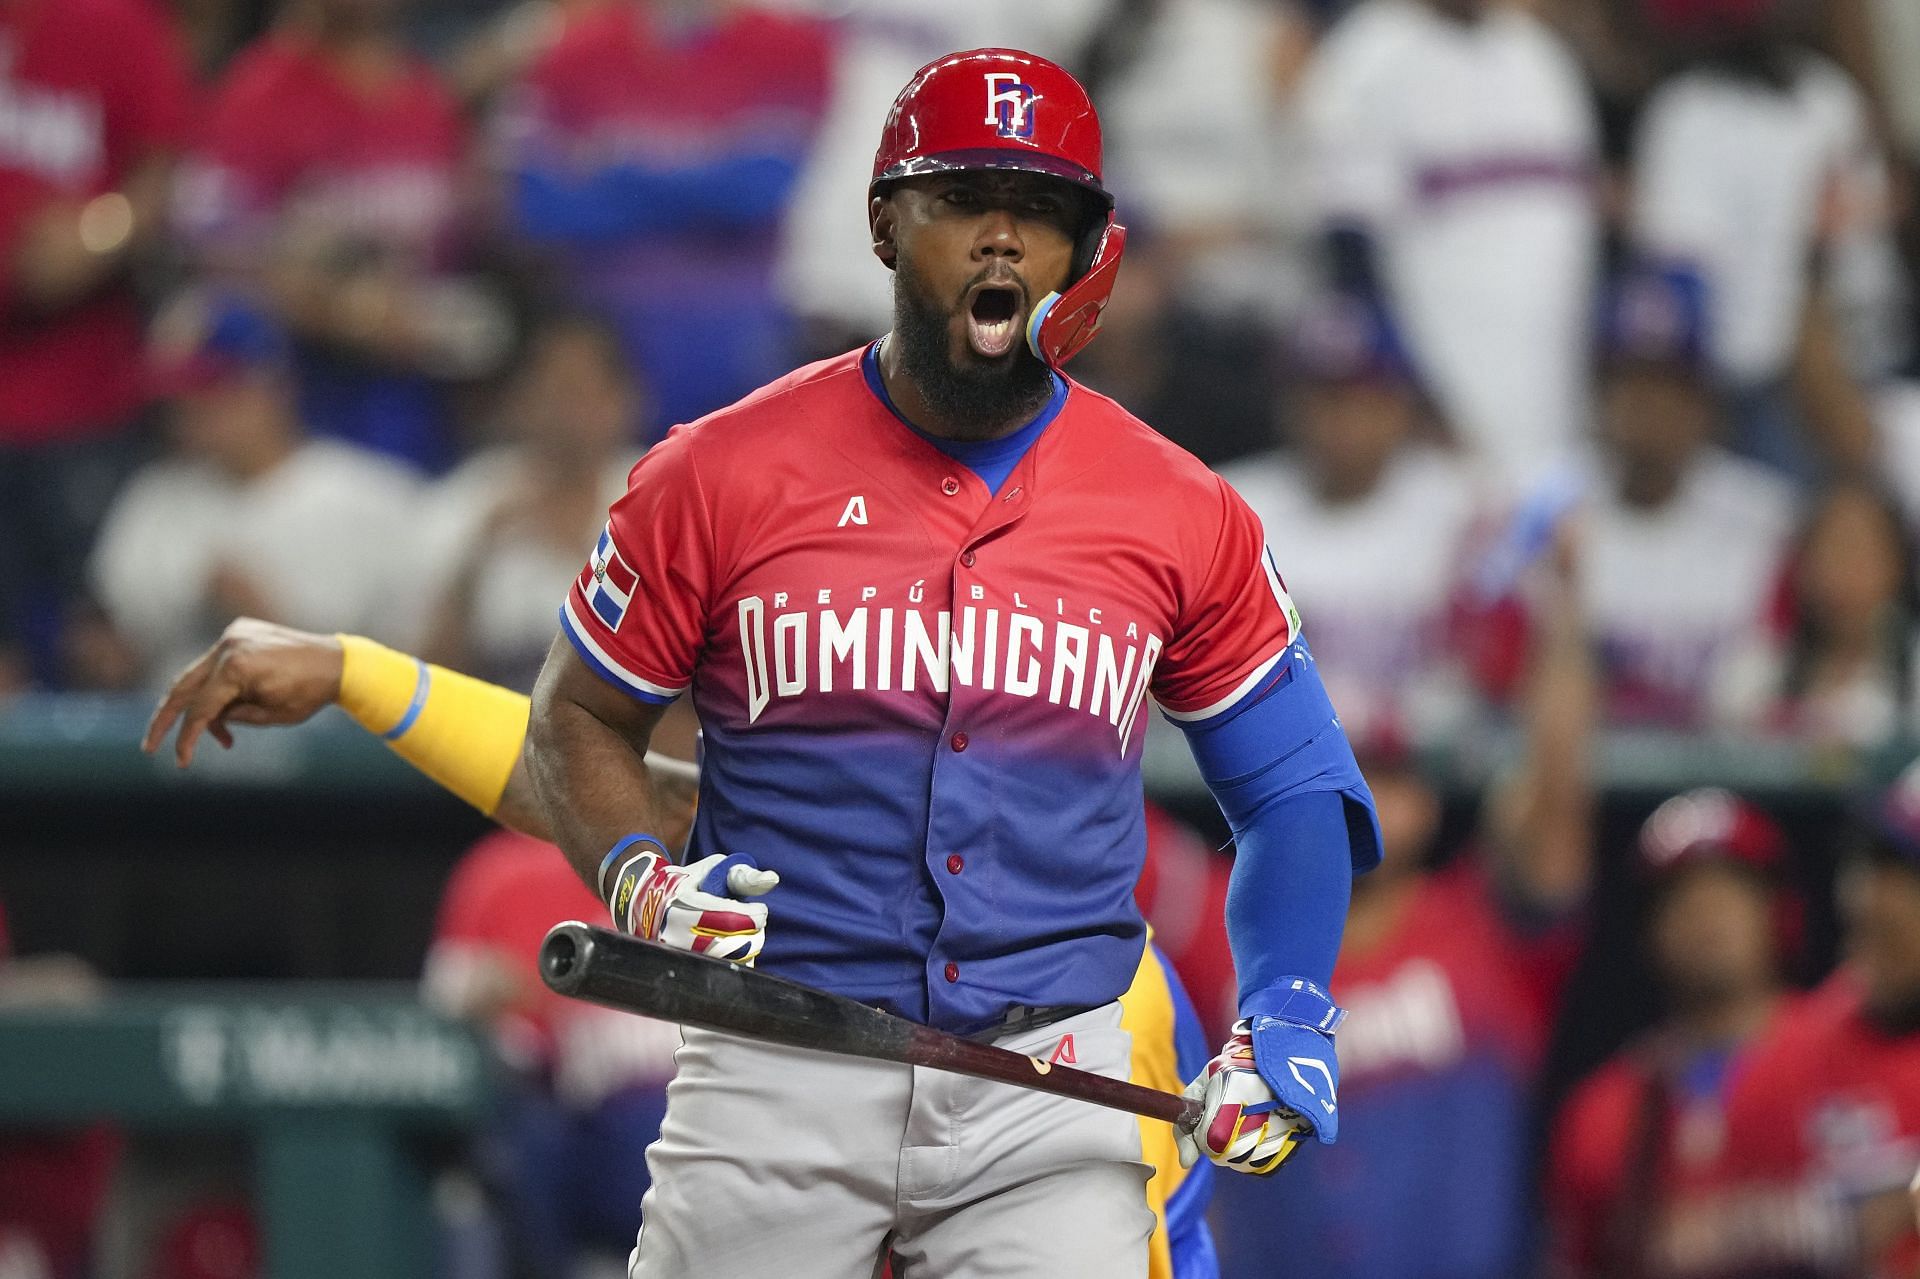 Dominican Republic vs Nicaragua WBC Live TV Listings, streaming options, and more